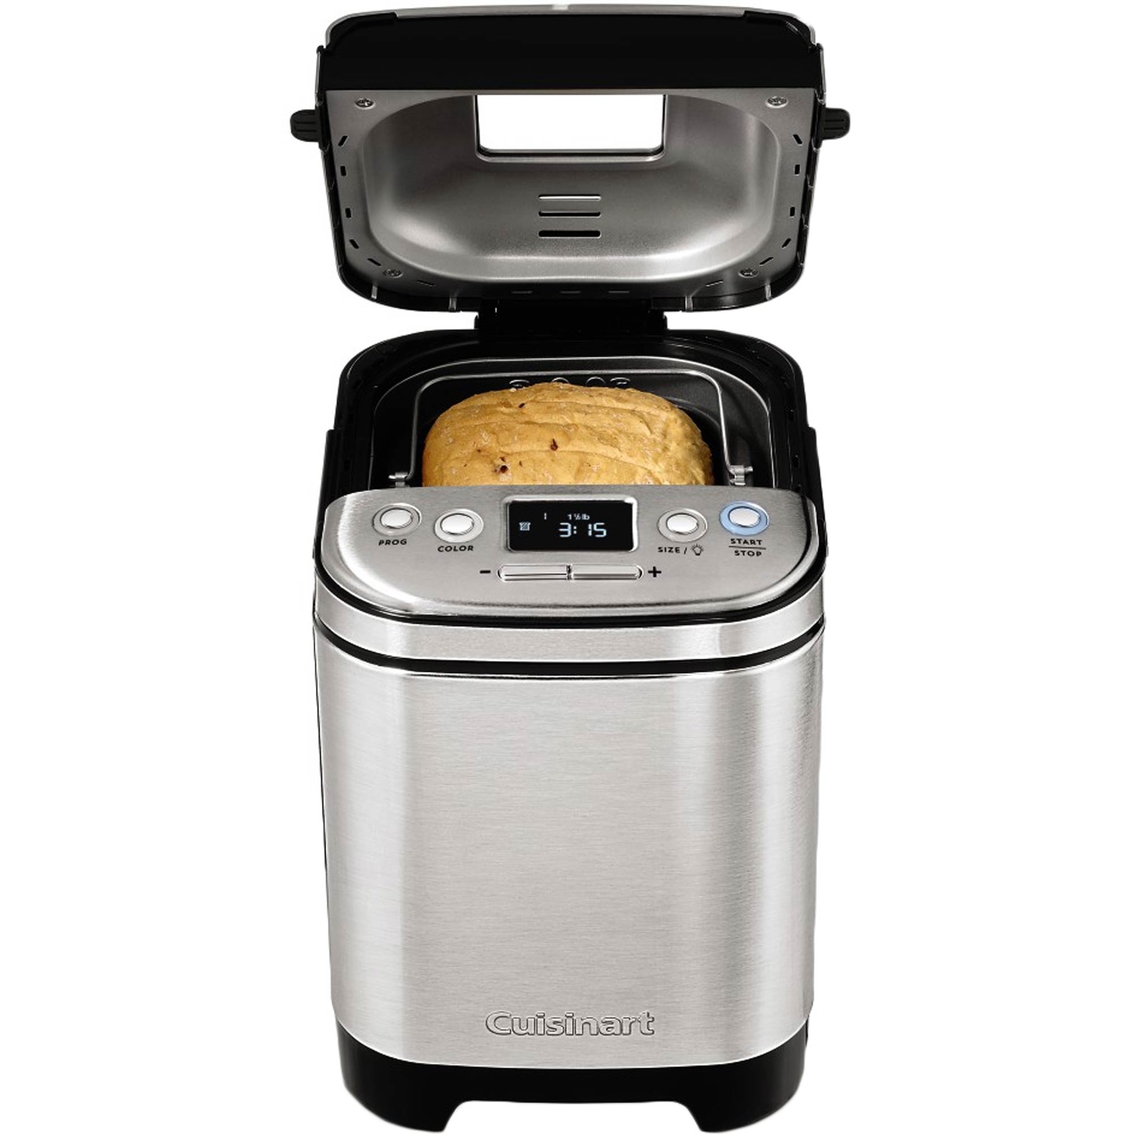 Cuisinart Compact Automatic Bread Maker - Image 3 of 4